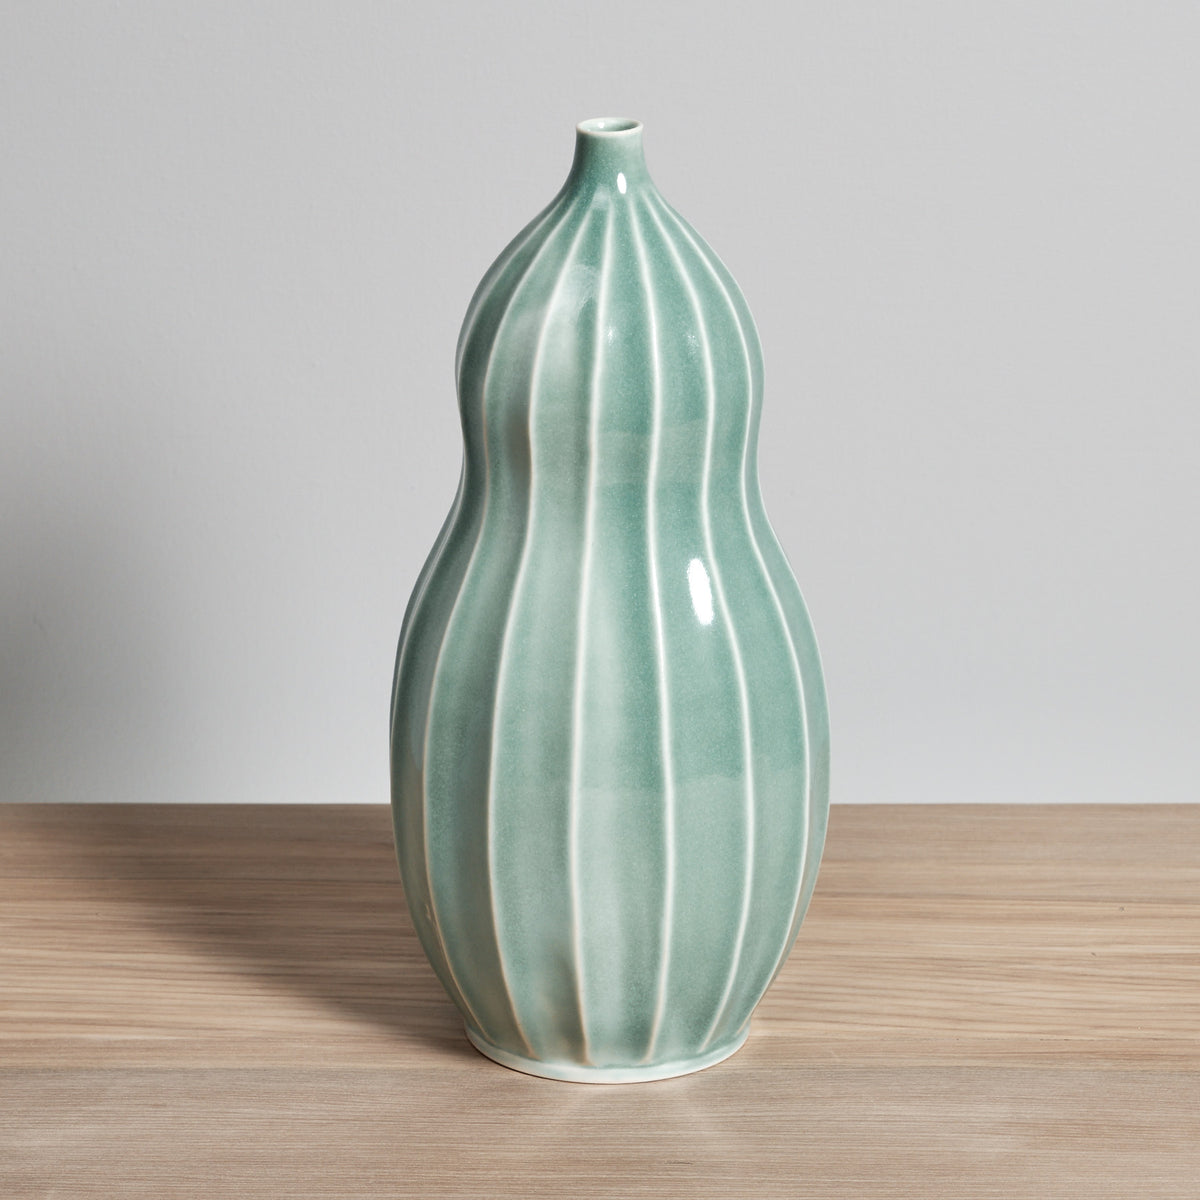 A Gourd Vase - Celadon sitting on a wooden table manufactured by Jino Ceramic Studio.